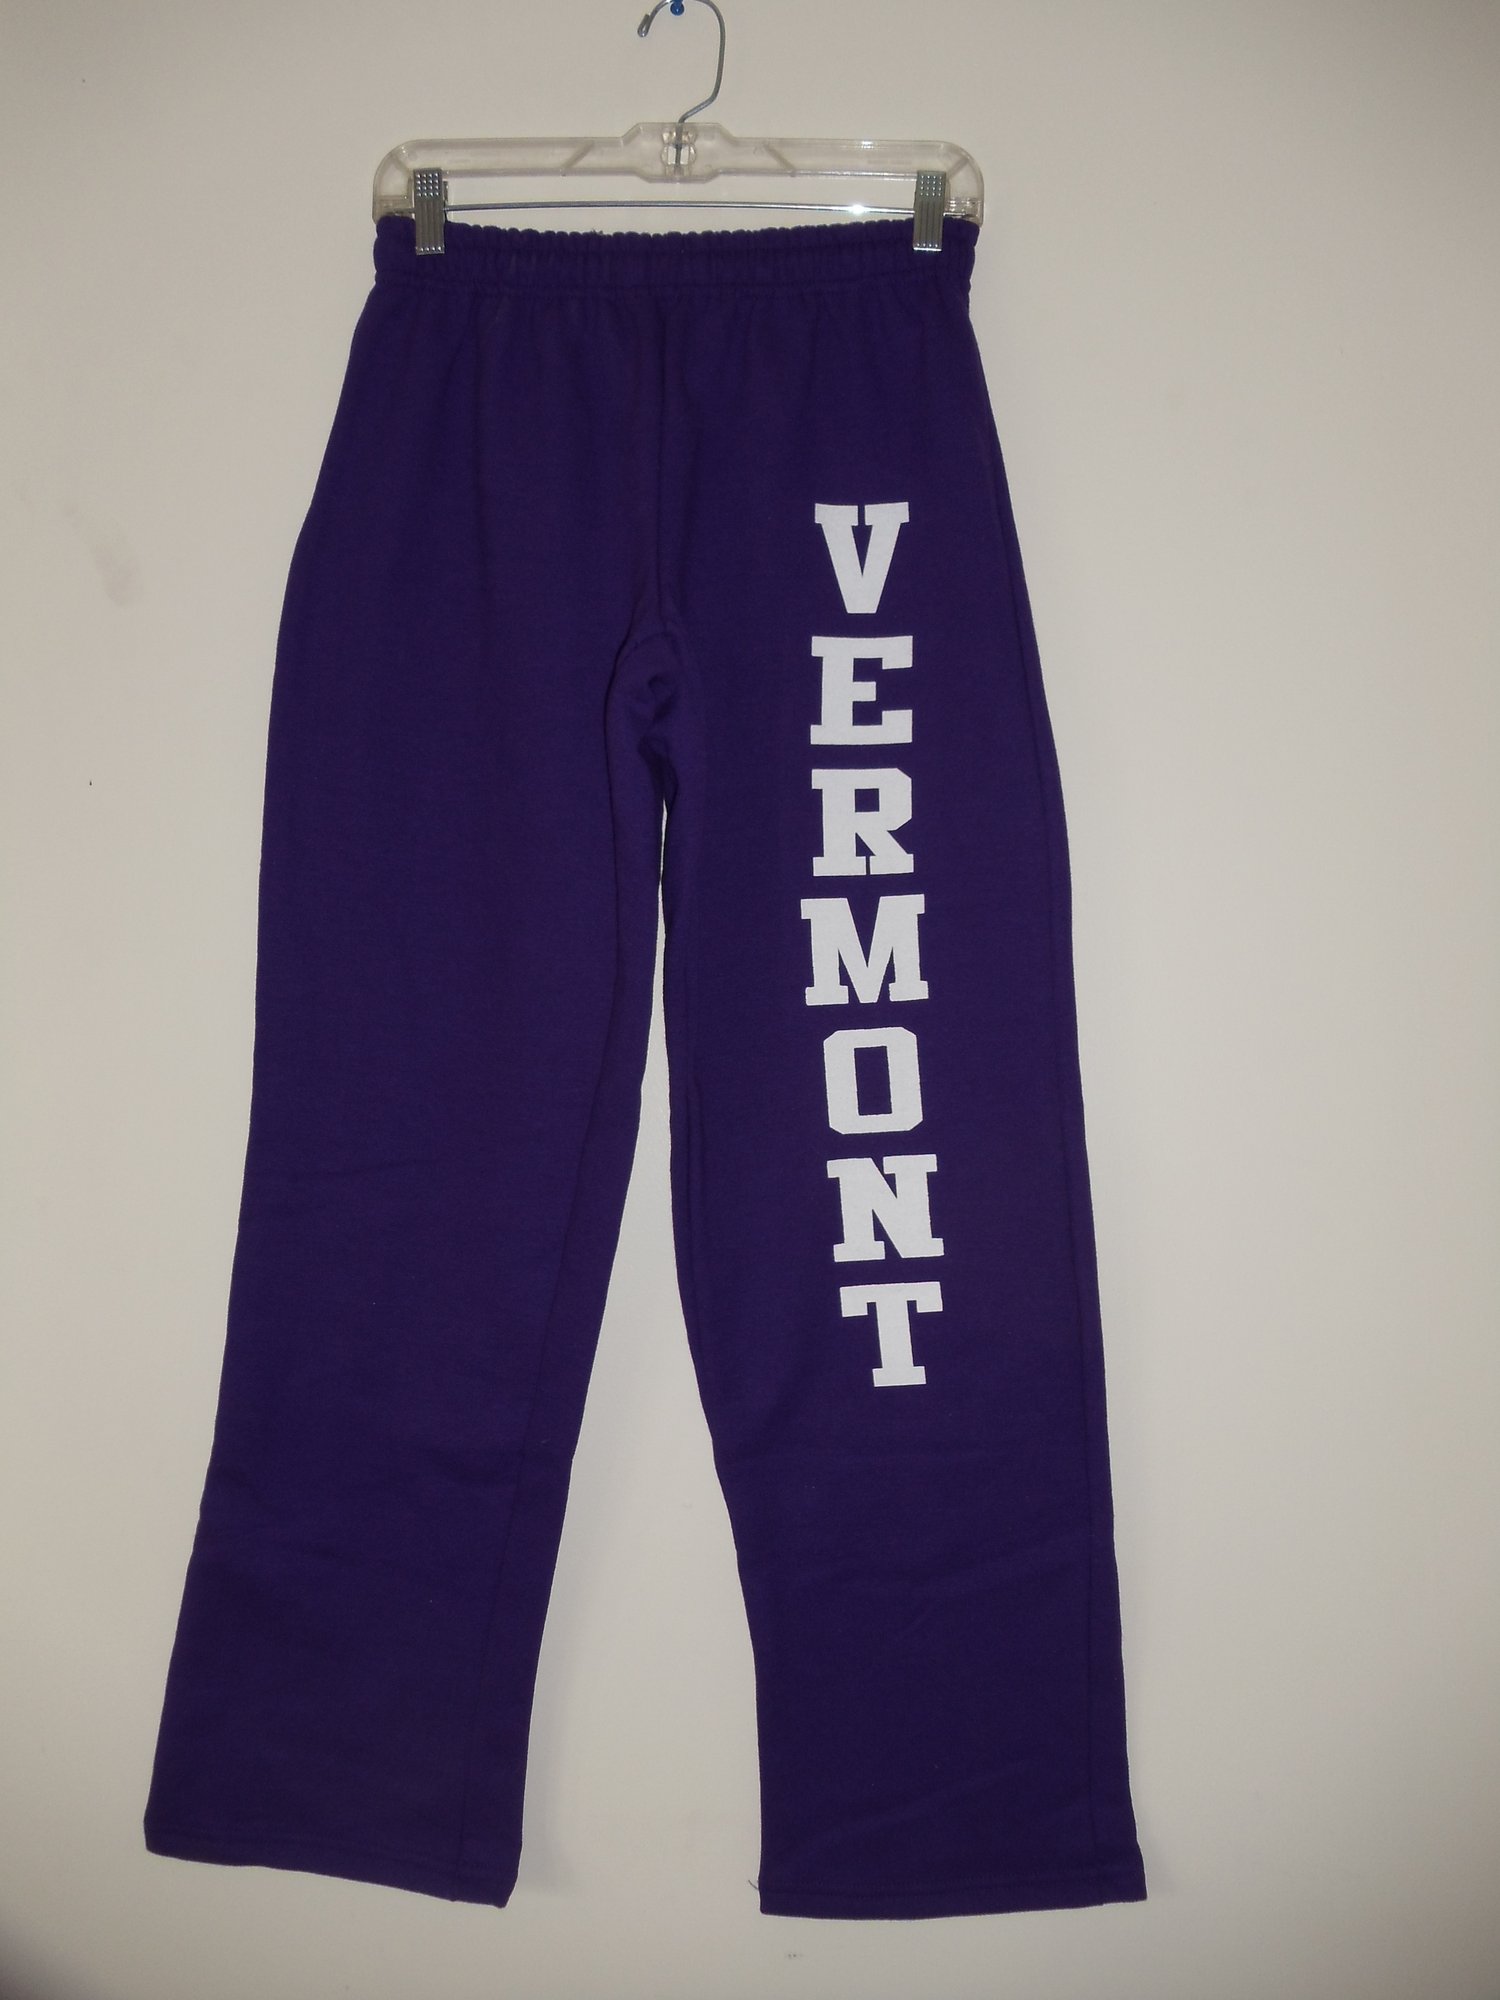 Image of Vermont Sweatpants 8oz White Vermont on Purple - Vermont clothing - 802 clothing - 802 store